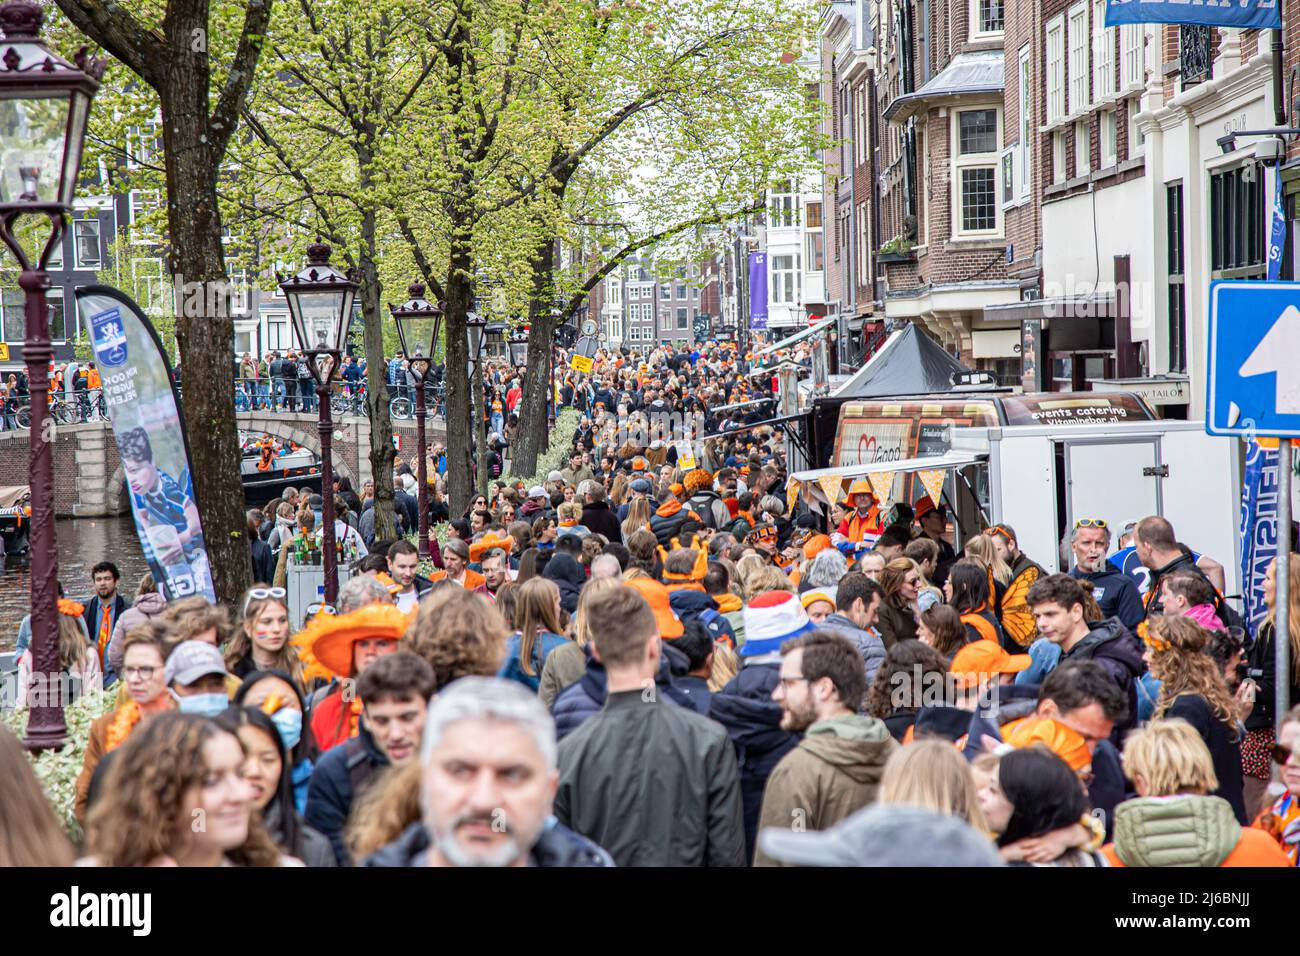 Crowds of people seen on the Streets of Amsterdam during the King's Day celebration. King's Day known as Koningsdag is an orange filled celebration for the king's birthday, a national holiday full of events across the country. Thousands of local revellers and tourists visited Amsterdam to celebrate and party around the canals while wearing orange clothes and the boats doing a parade in the water canals. Stock Photo